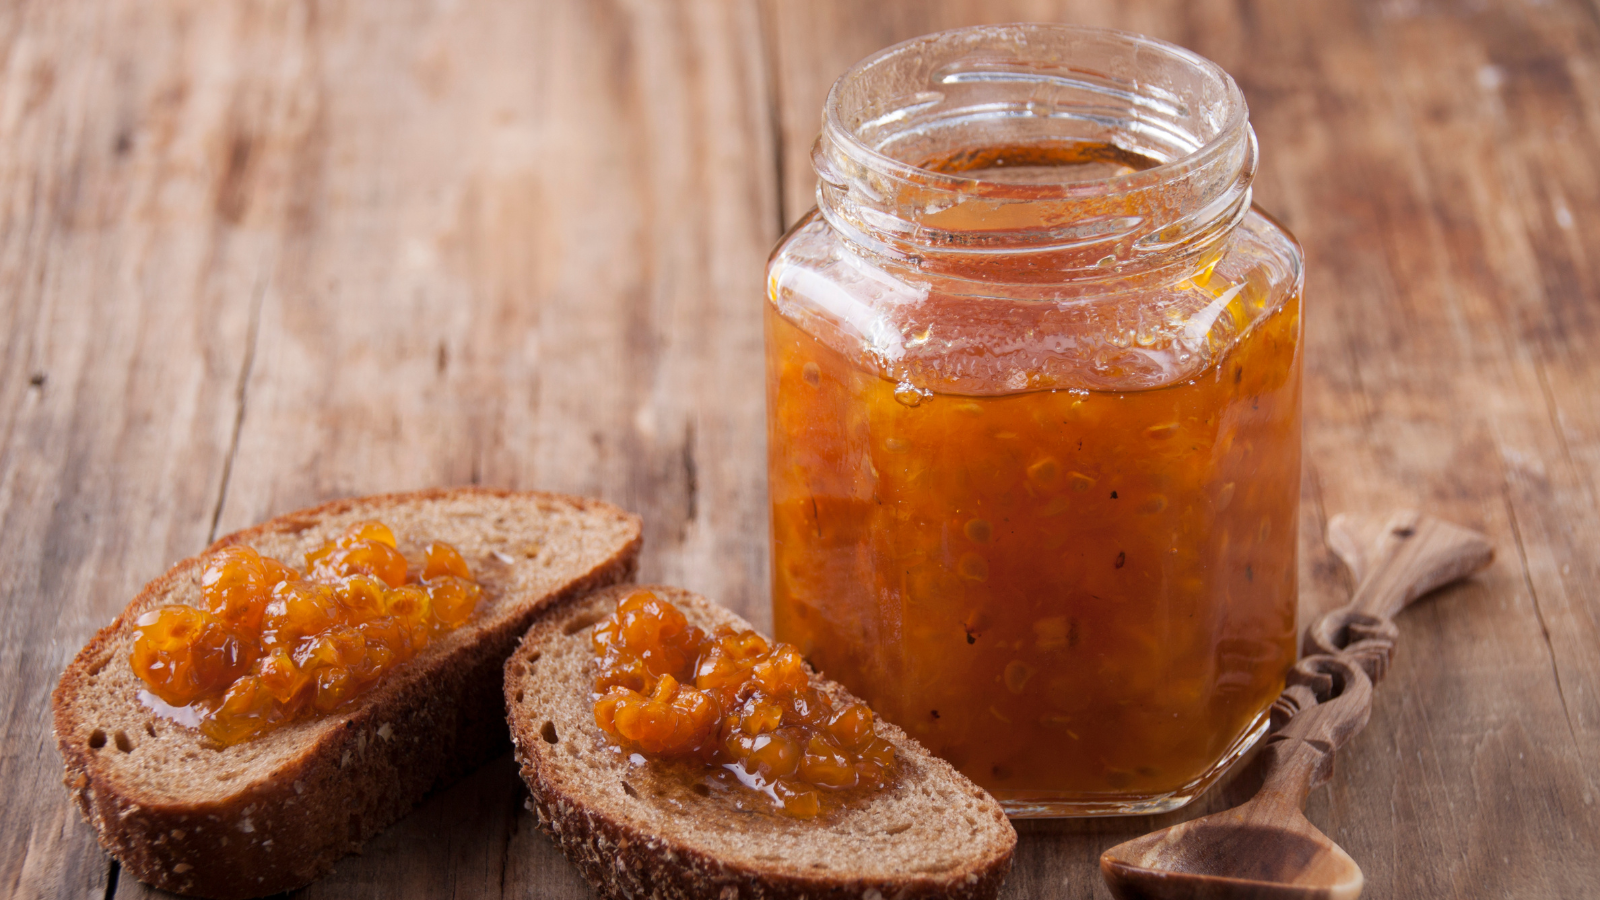 Cloudberry jam - gifts from coach rental in Norway